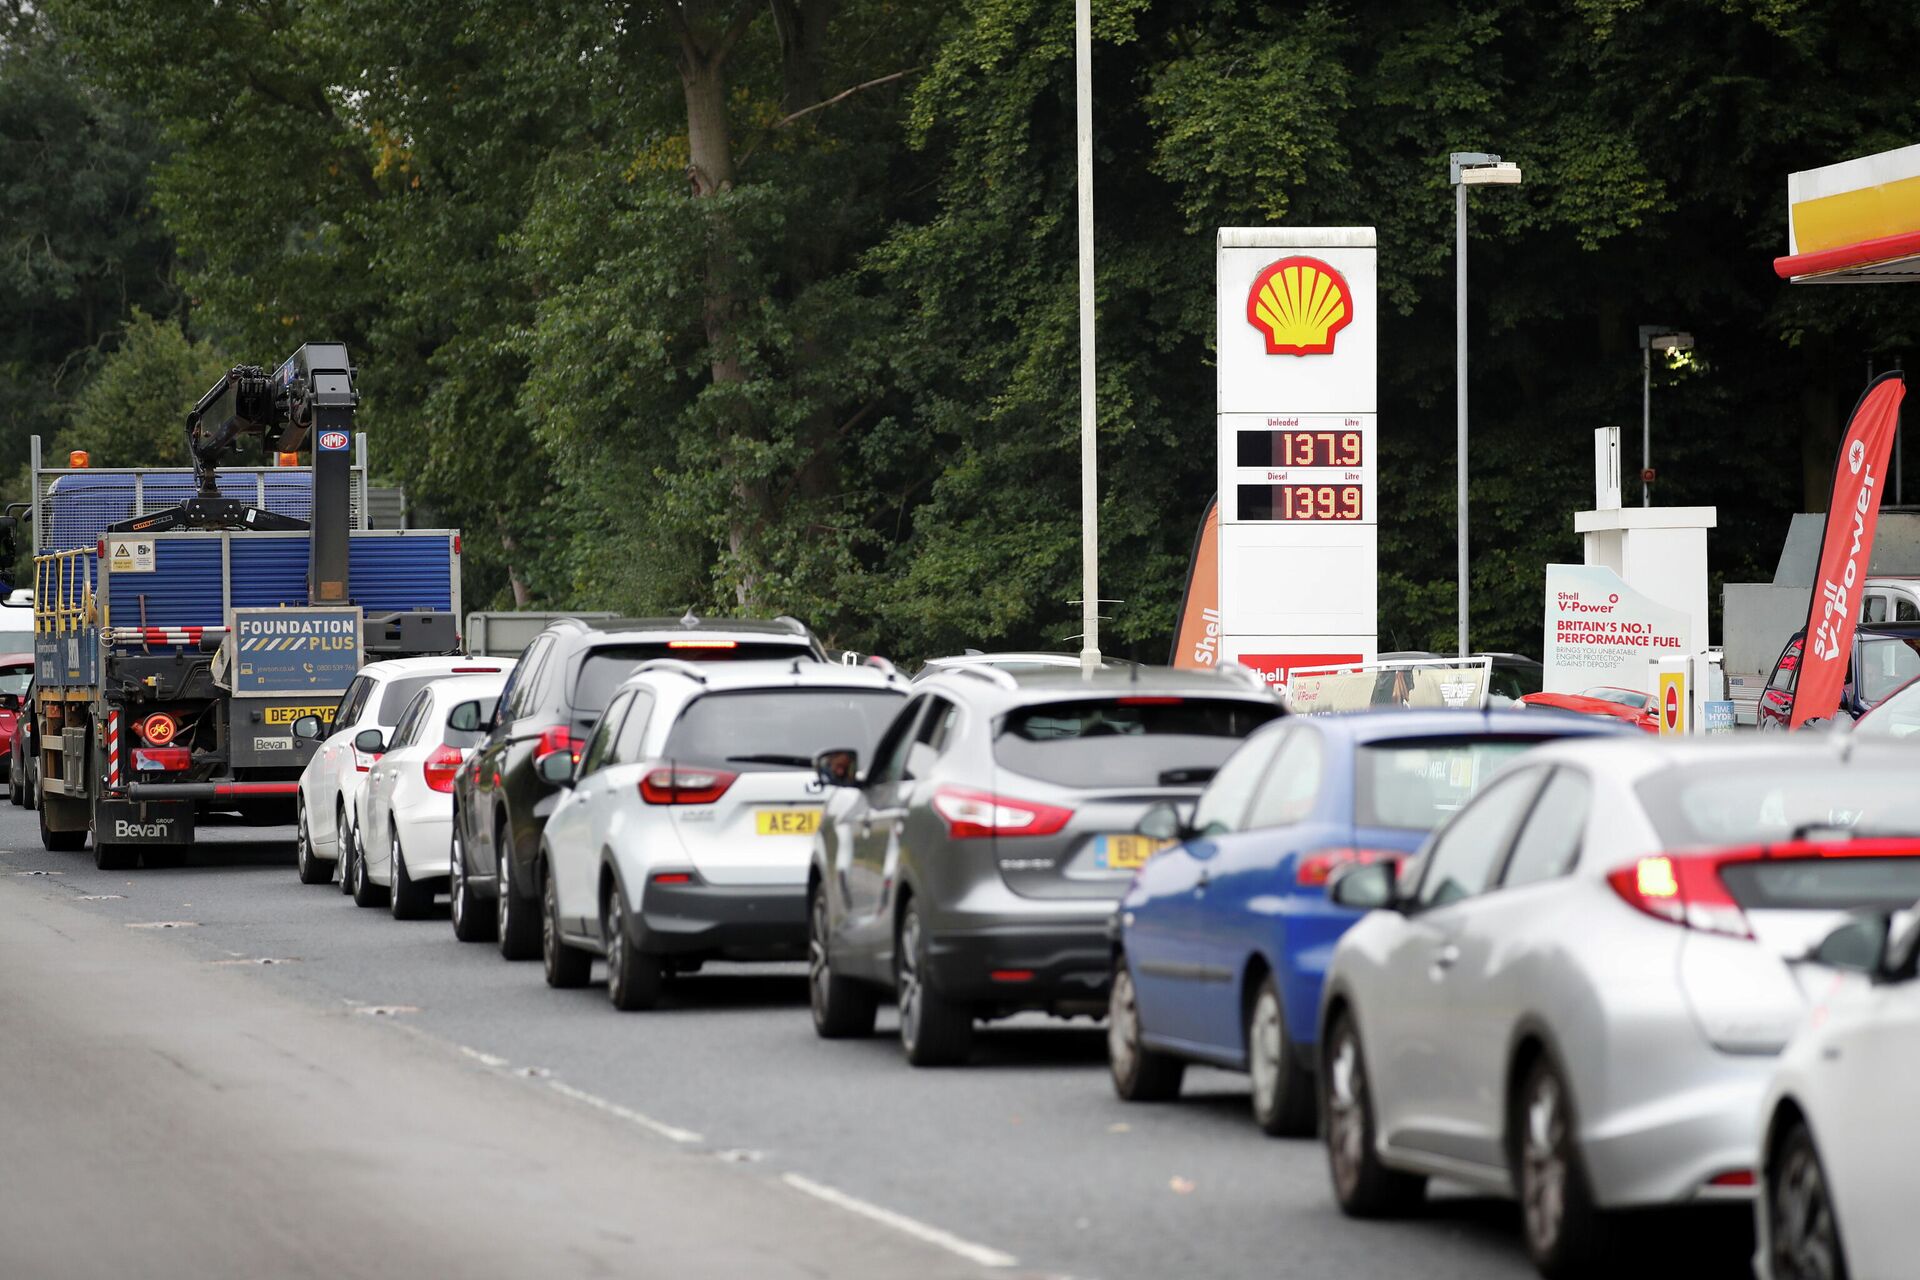 Vehicles queue to refill outside a Shell fuel station in Redbourn, Britain, September 25, 2021. REUTERS/Peter Cziborra - Sputnik International, 1920, 23.10.2021